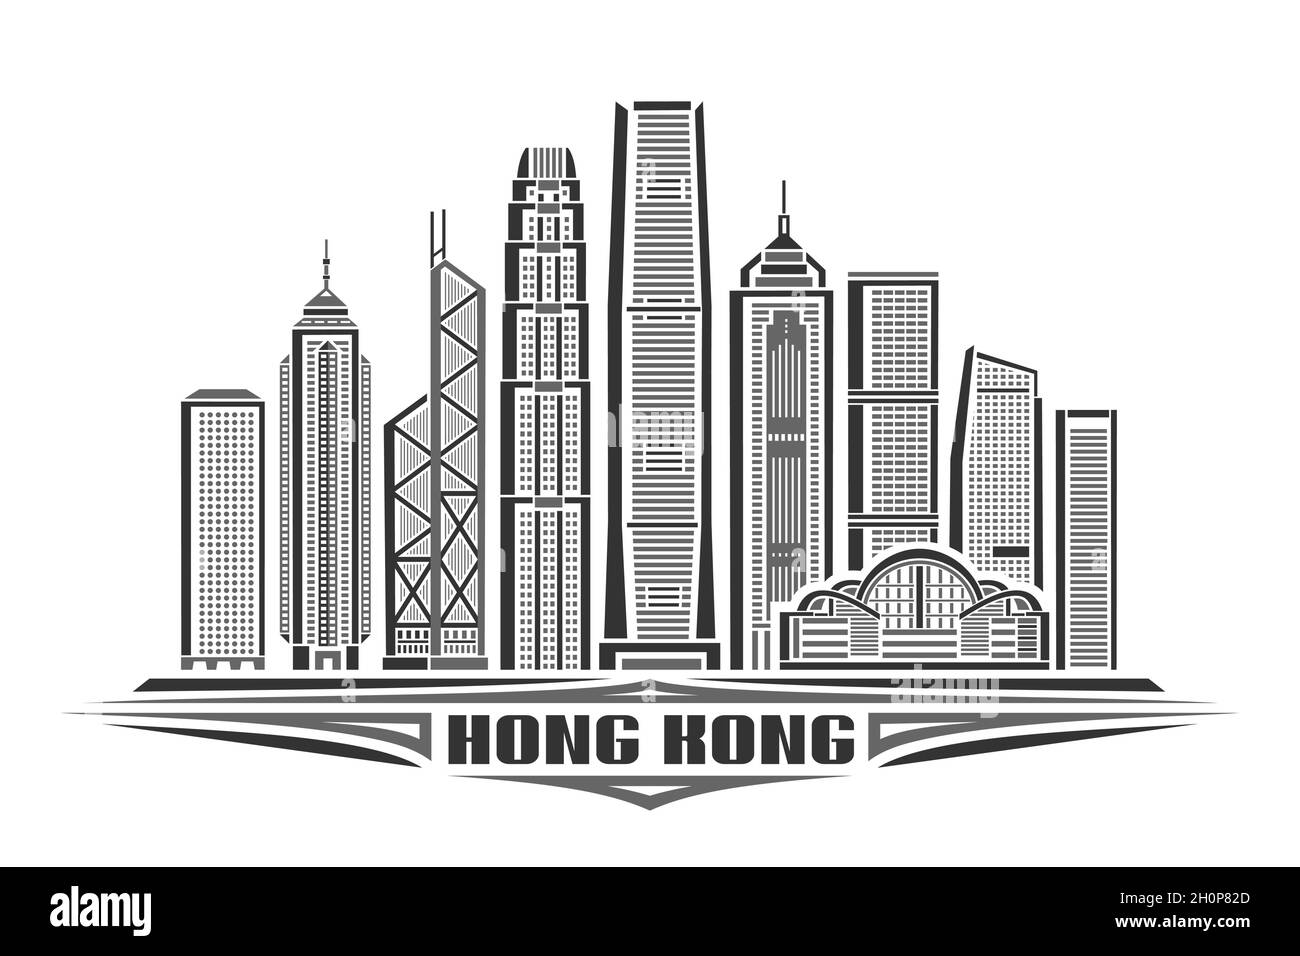 Vector illustration of Hong Kong, monochrome horizontal poster with linear design famous hongkong city scape, urban line art concept with decorative l Stock Vector